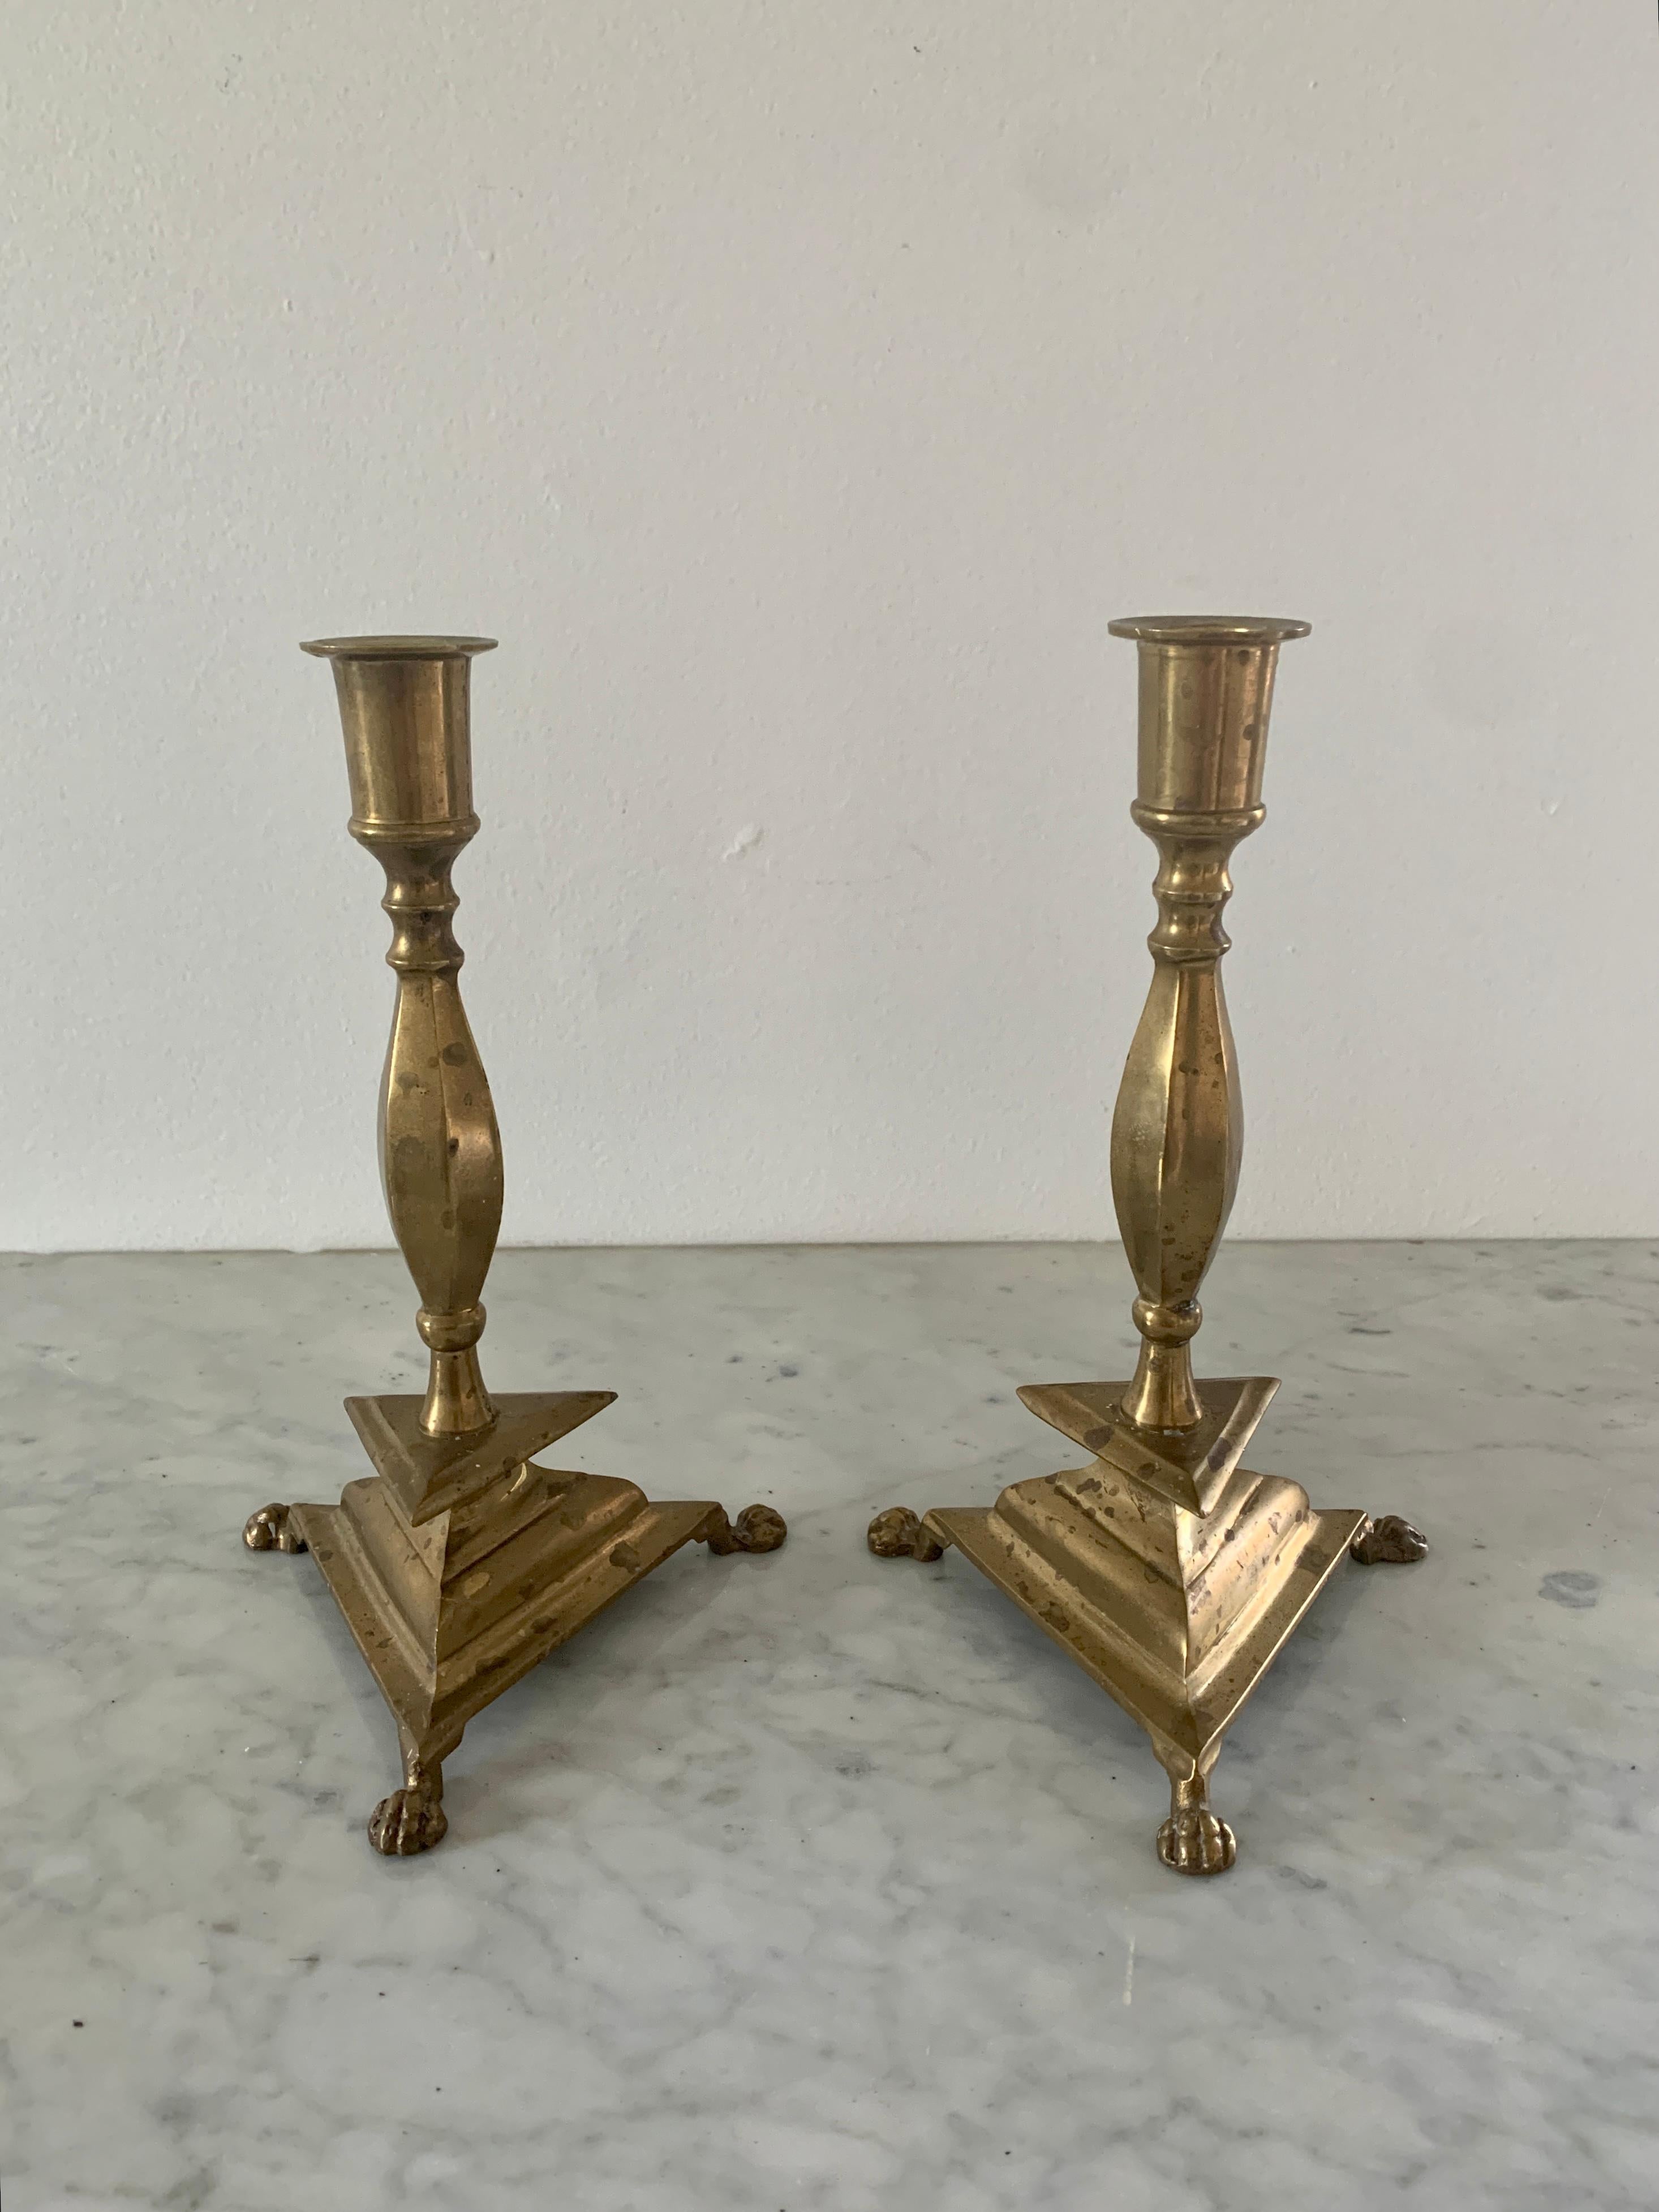 Neoclassical Brass Paw Foot Candlestick Holders, Pair In Good Condition For Sale In Elkhart, IN